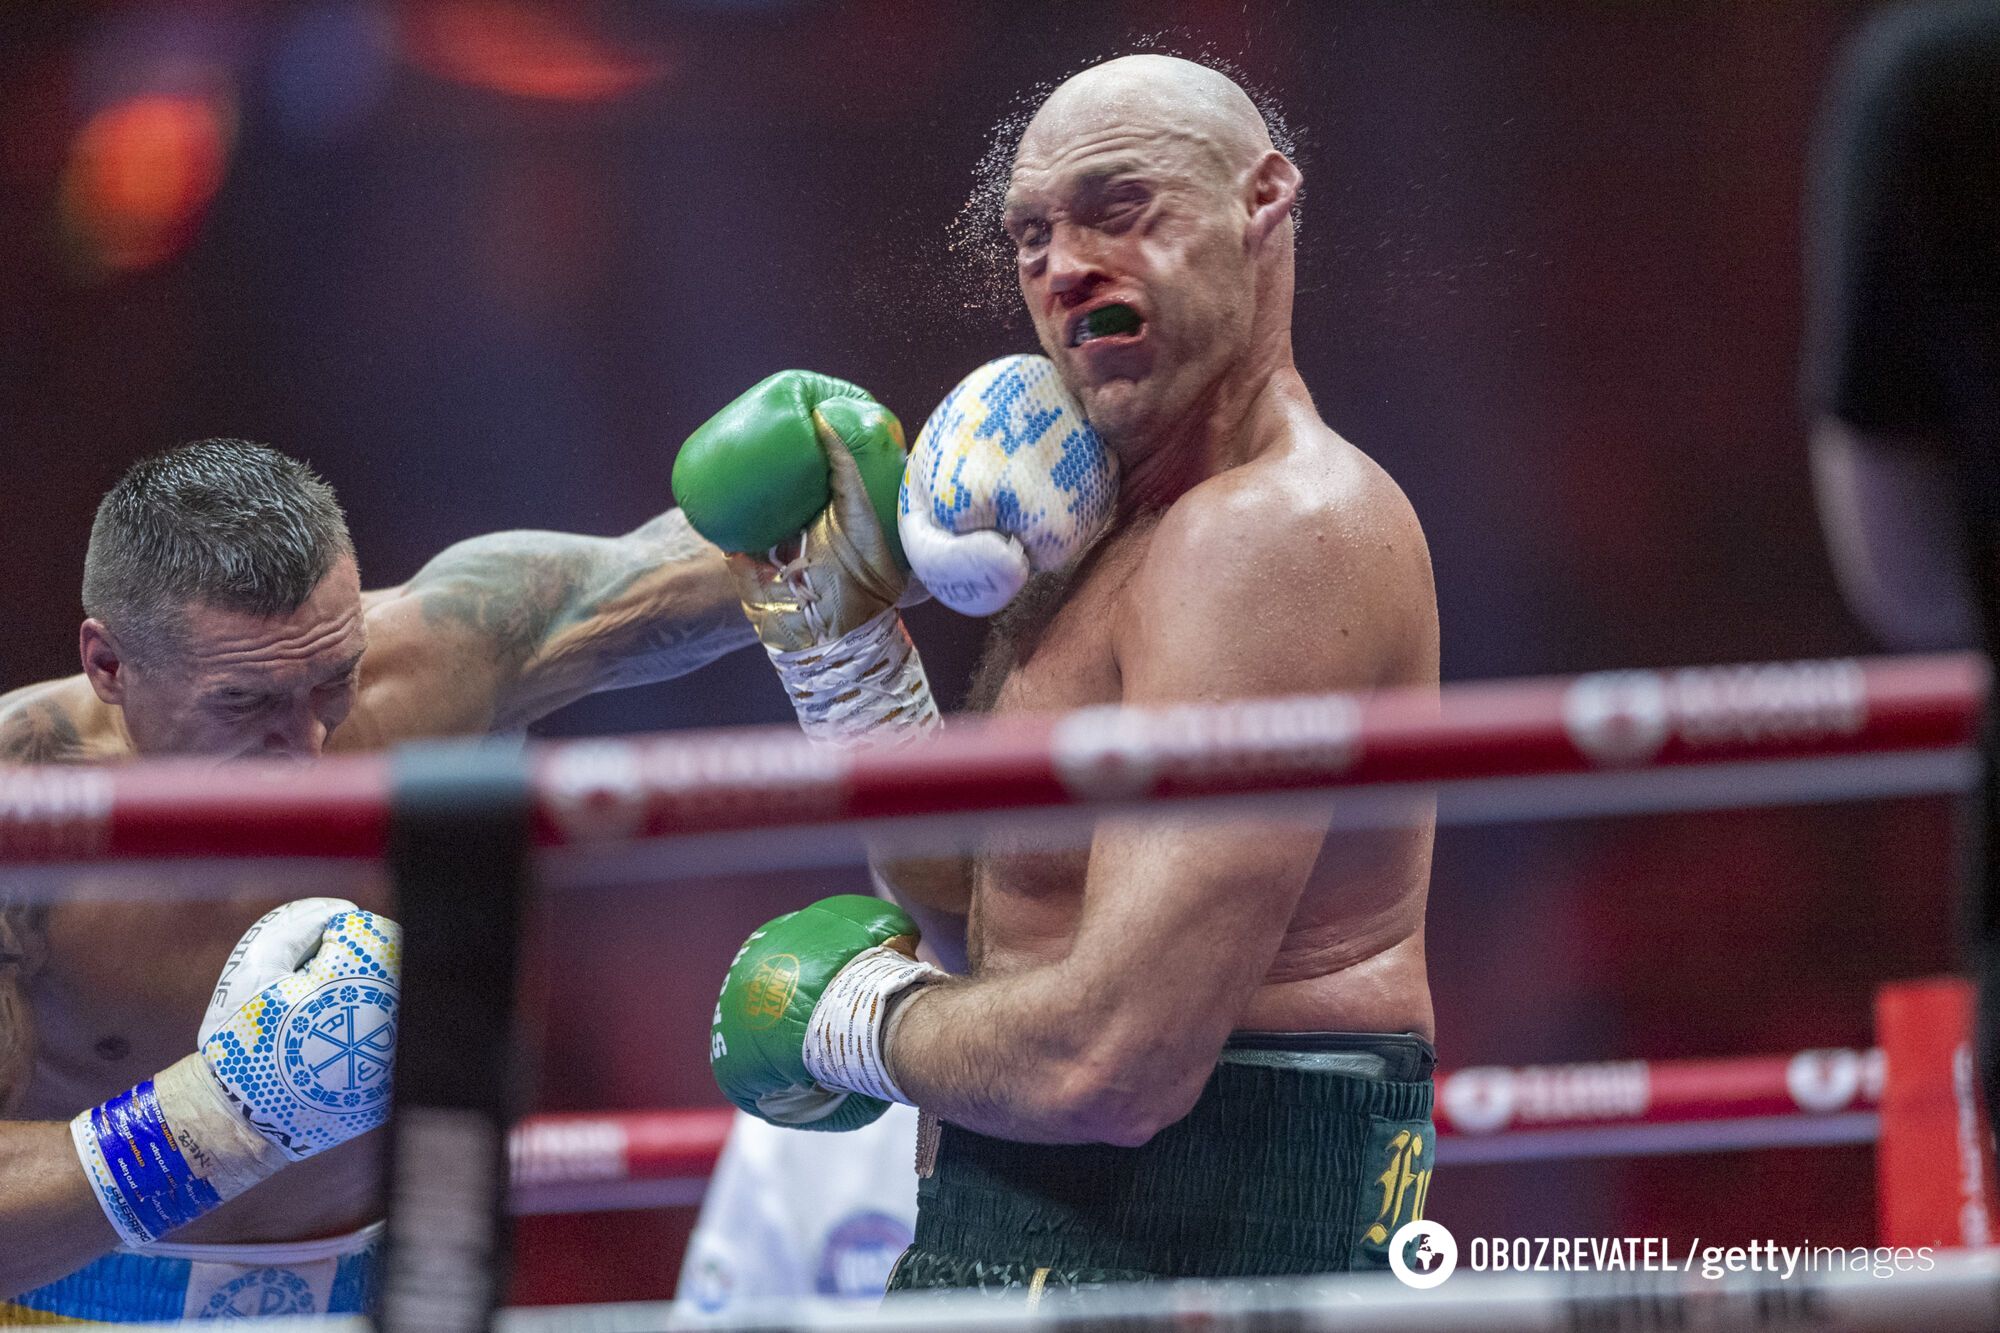 The fantastic rematch fee of Usyk – Fury was announced